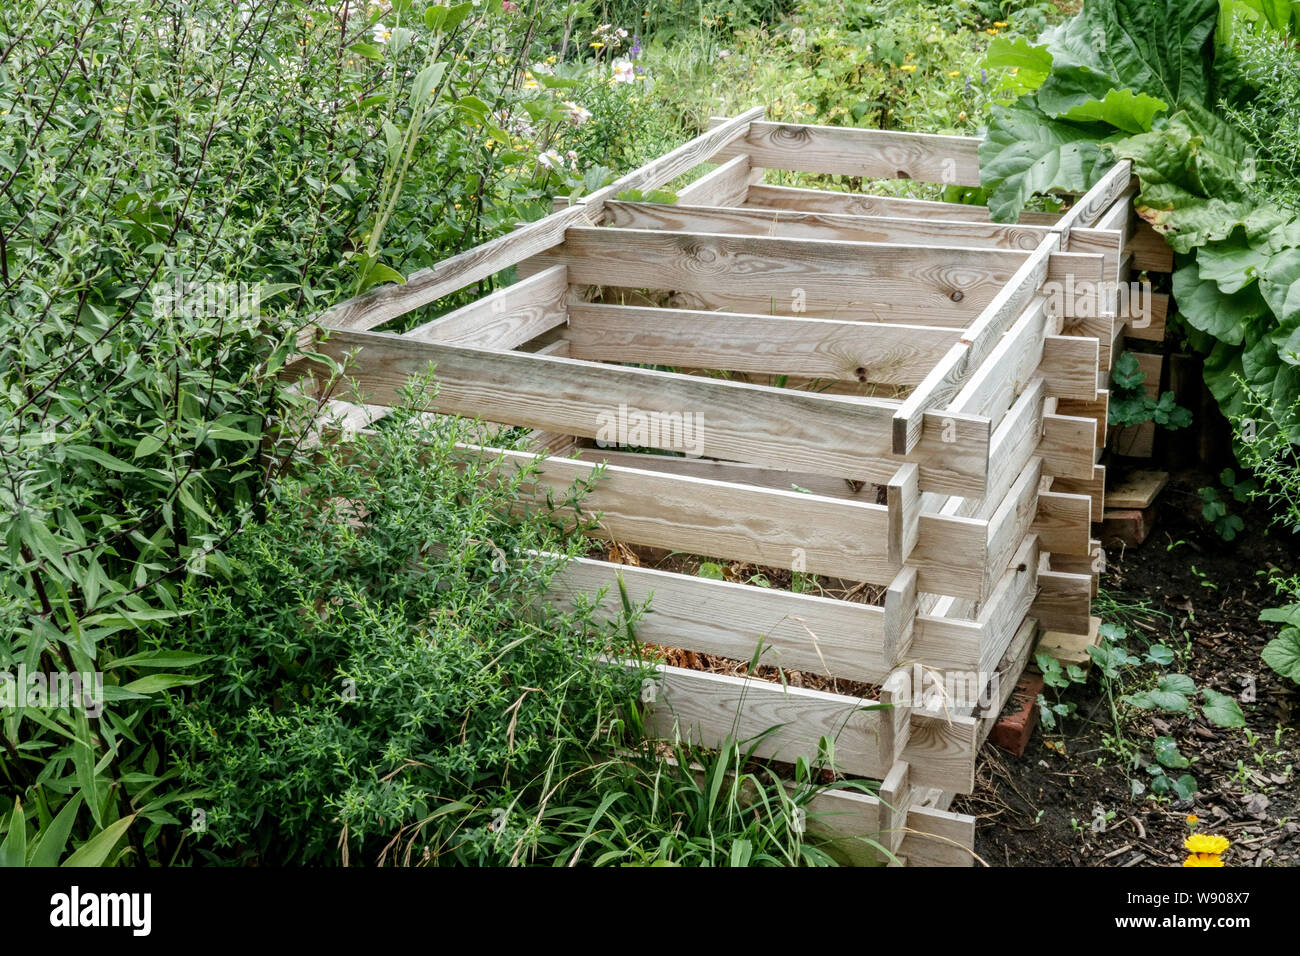 Wooden composter located in the shady part of the garden, Stock Photo